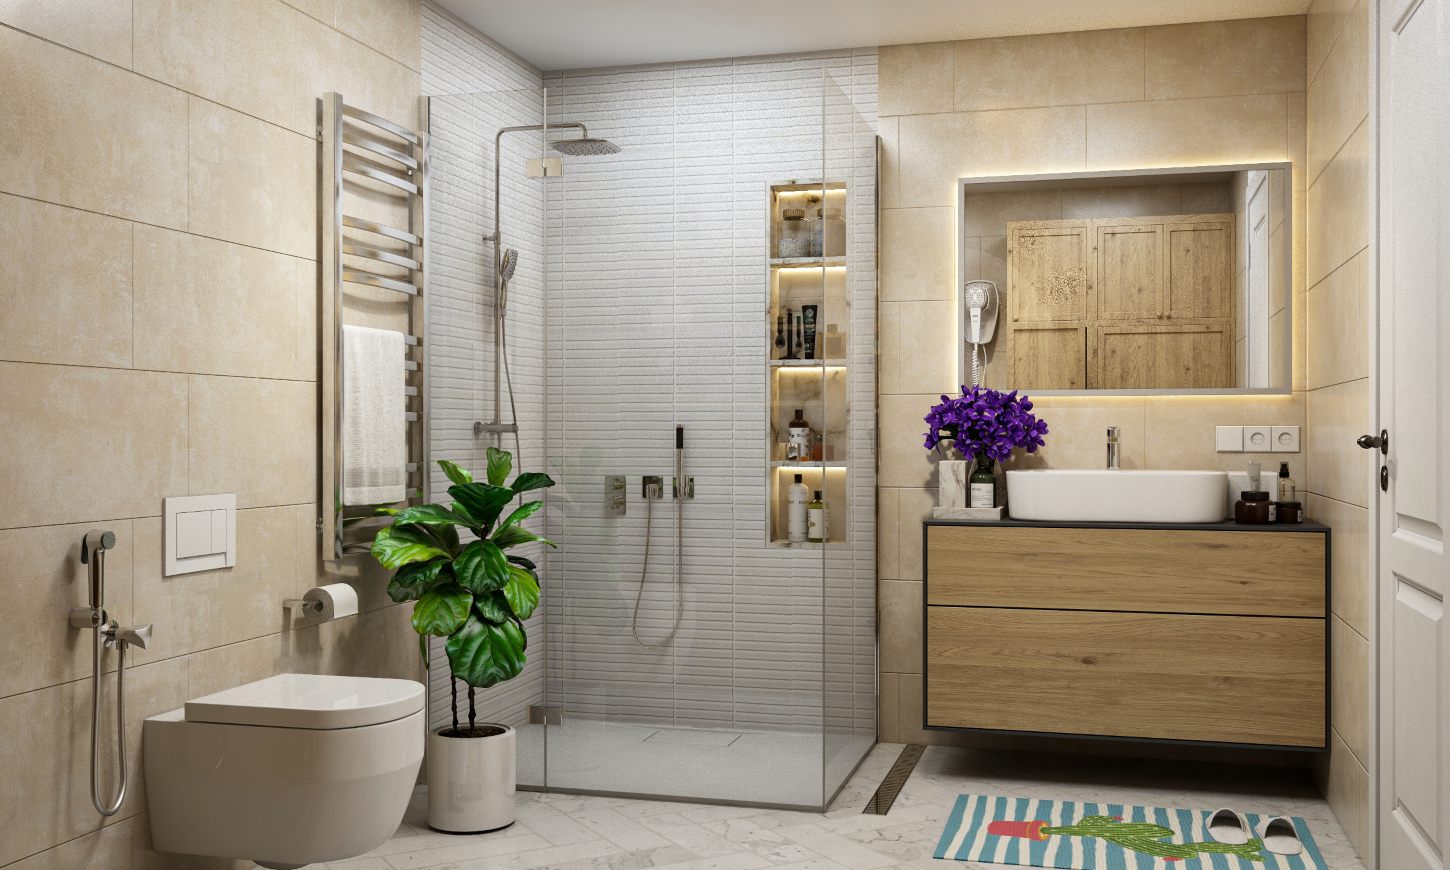 Modern bathroom design with shower unit with glass partition